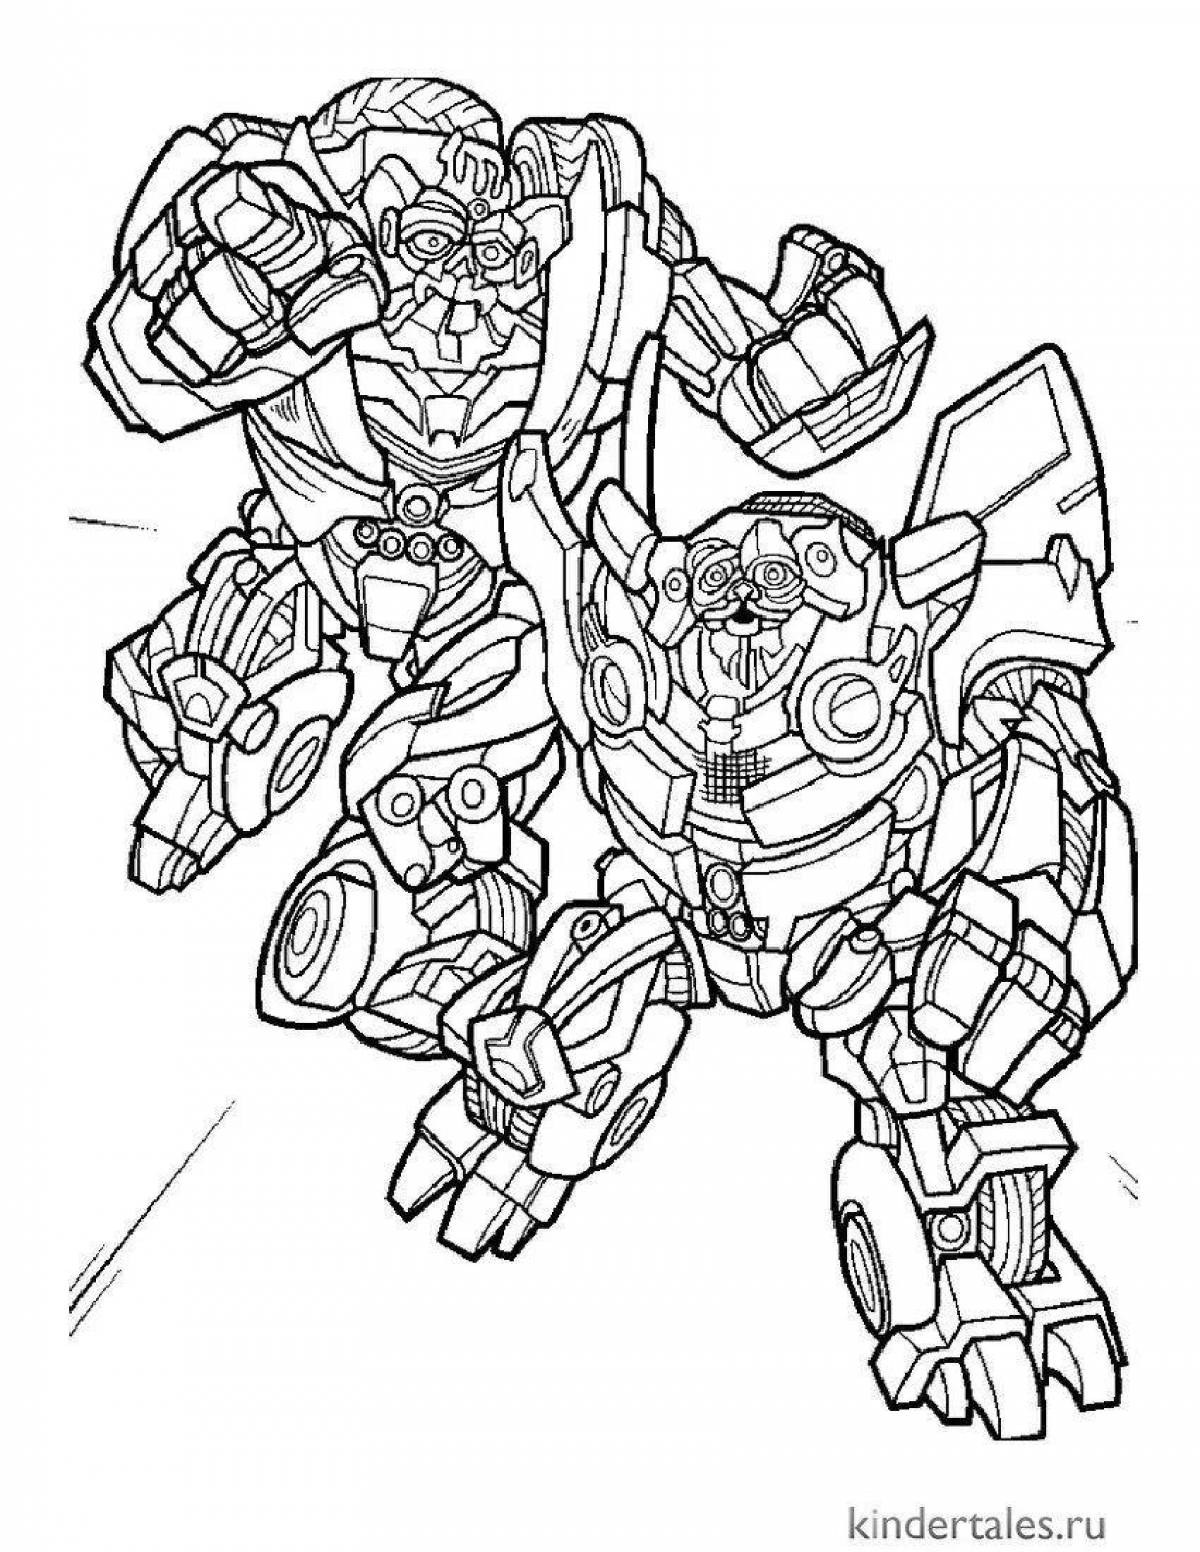 Charming transformers movie coloring book